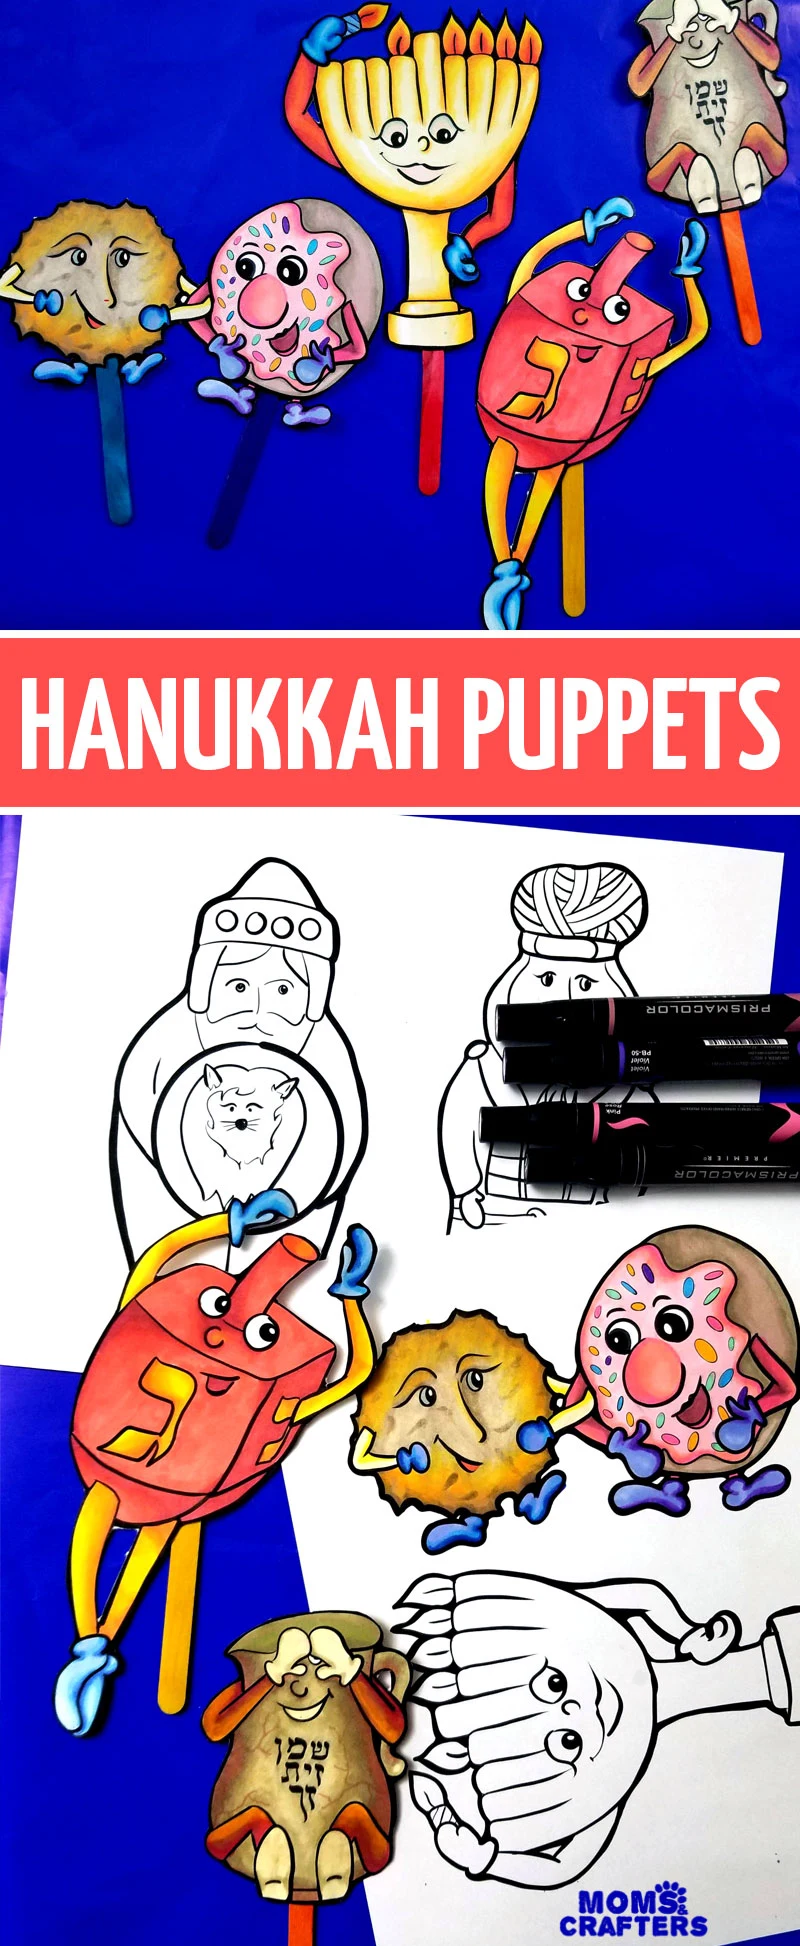 Grab n print these fun, animated Hanukkah puppets - an easy chanukah coloring pages set and activity for kids! This Hannukah paper craft is so much fun for the whole family.